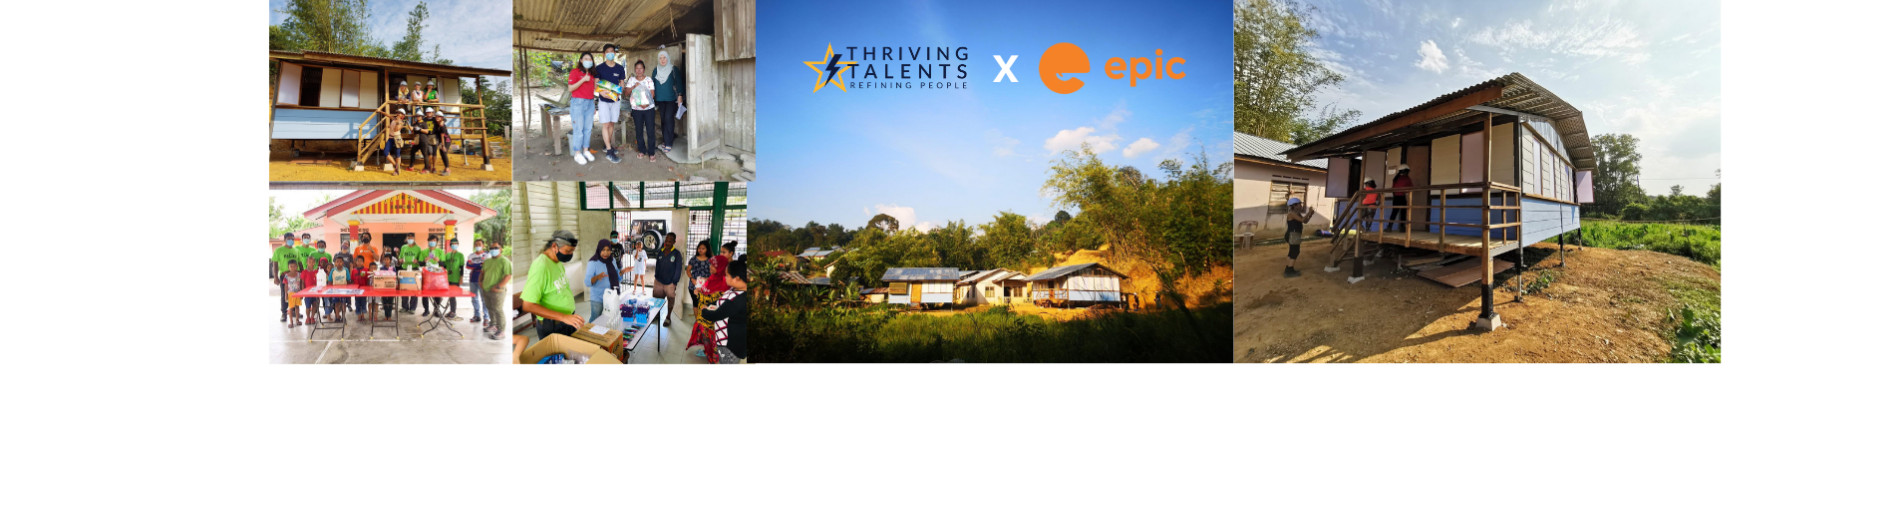 Thriving Talents x EPIC - Covid-19 Relief Fund 